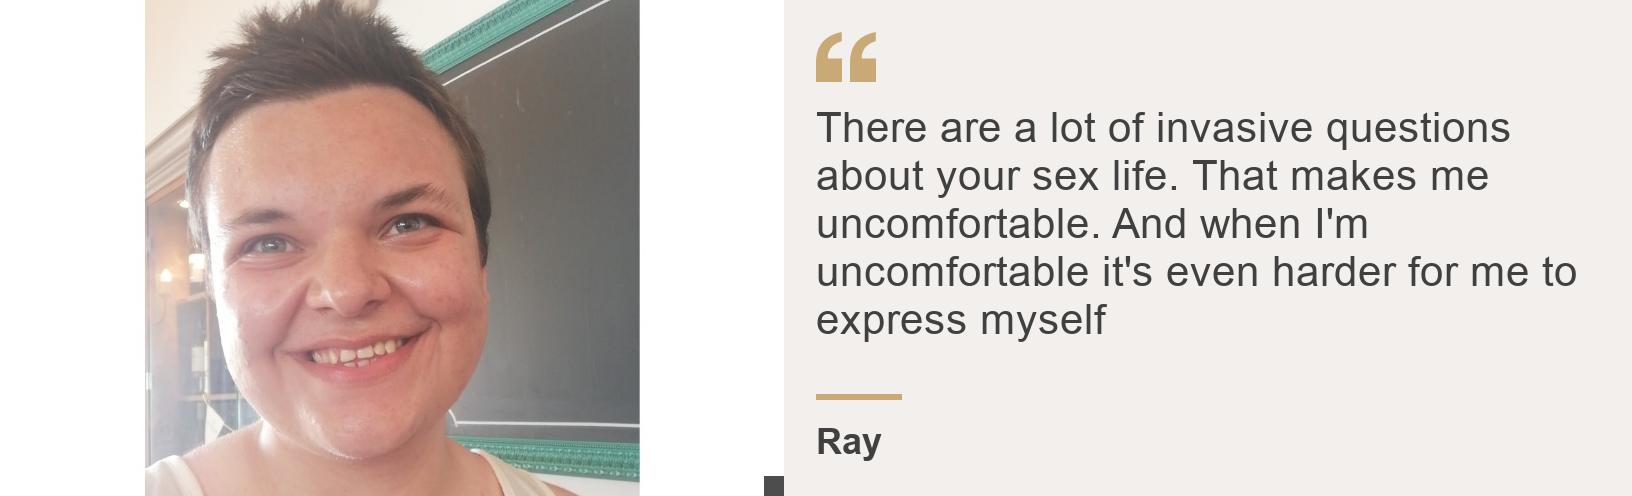 &quot;There are a lot of invasive questions about your sex life. That makes me uncomfortable. And when I'm uncomfortable it's even harder for me to express myself&quot;, Source: Ray, Source description: , Image: